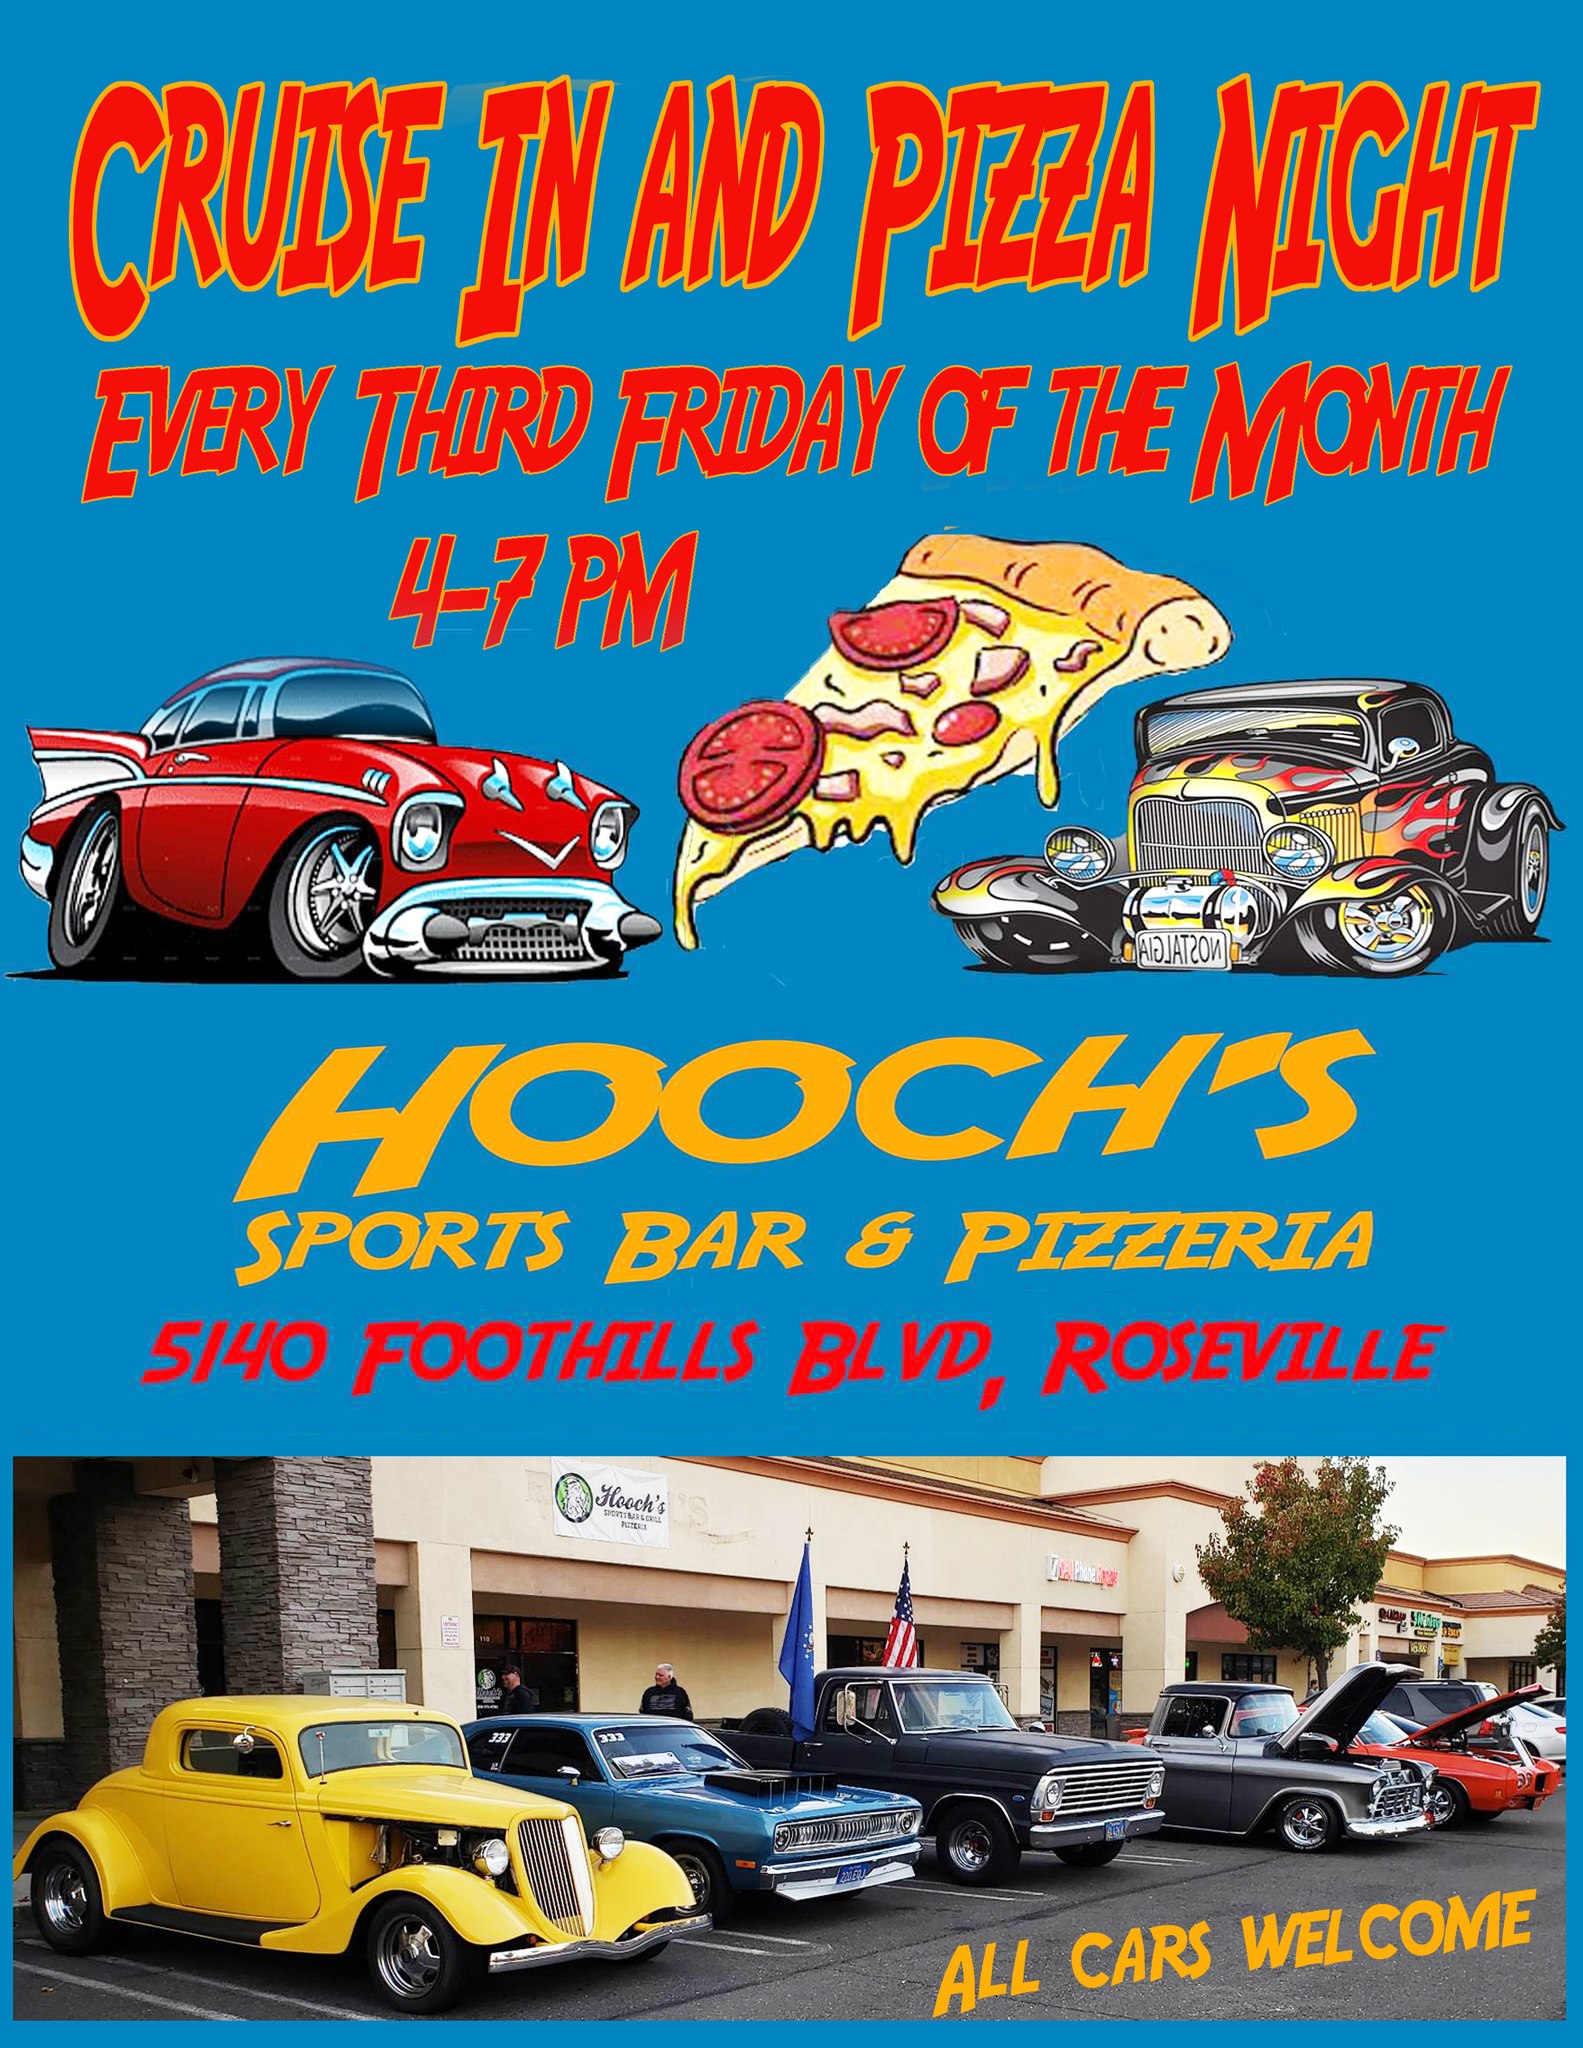 Hooch's Cruise In and Pizza Night